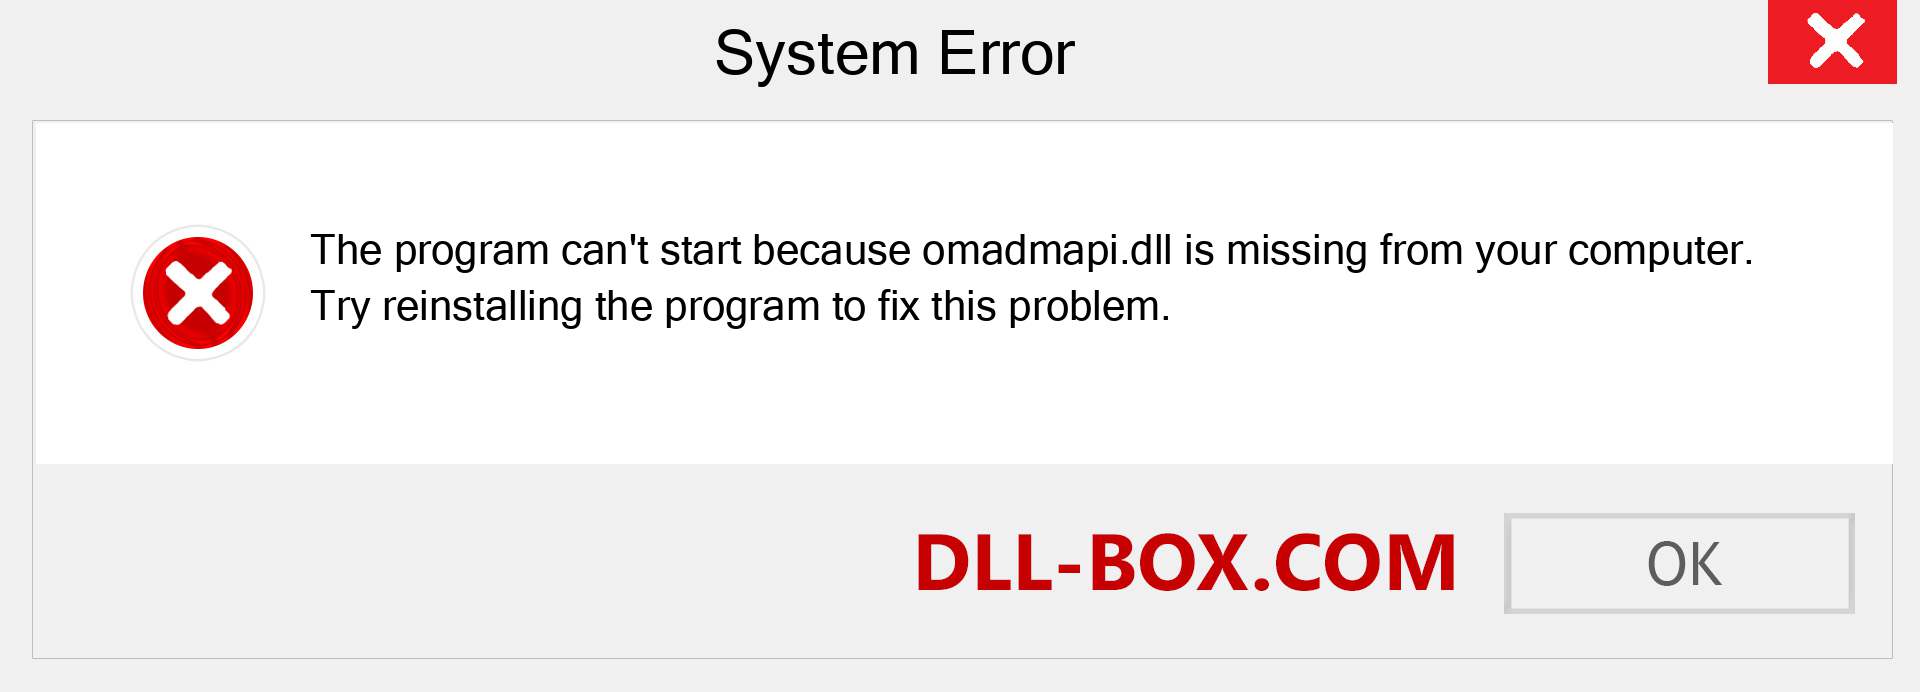  omadmapi.dll file is missing?. Download for Windows 7, 8, 10 - Fix  omadmapi dll Missing Error on Windows, photos, images